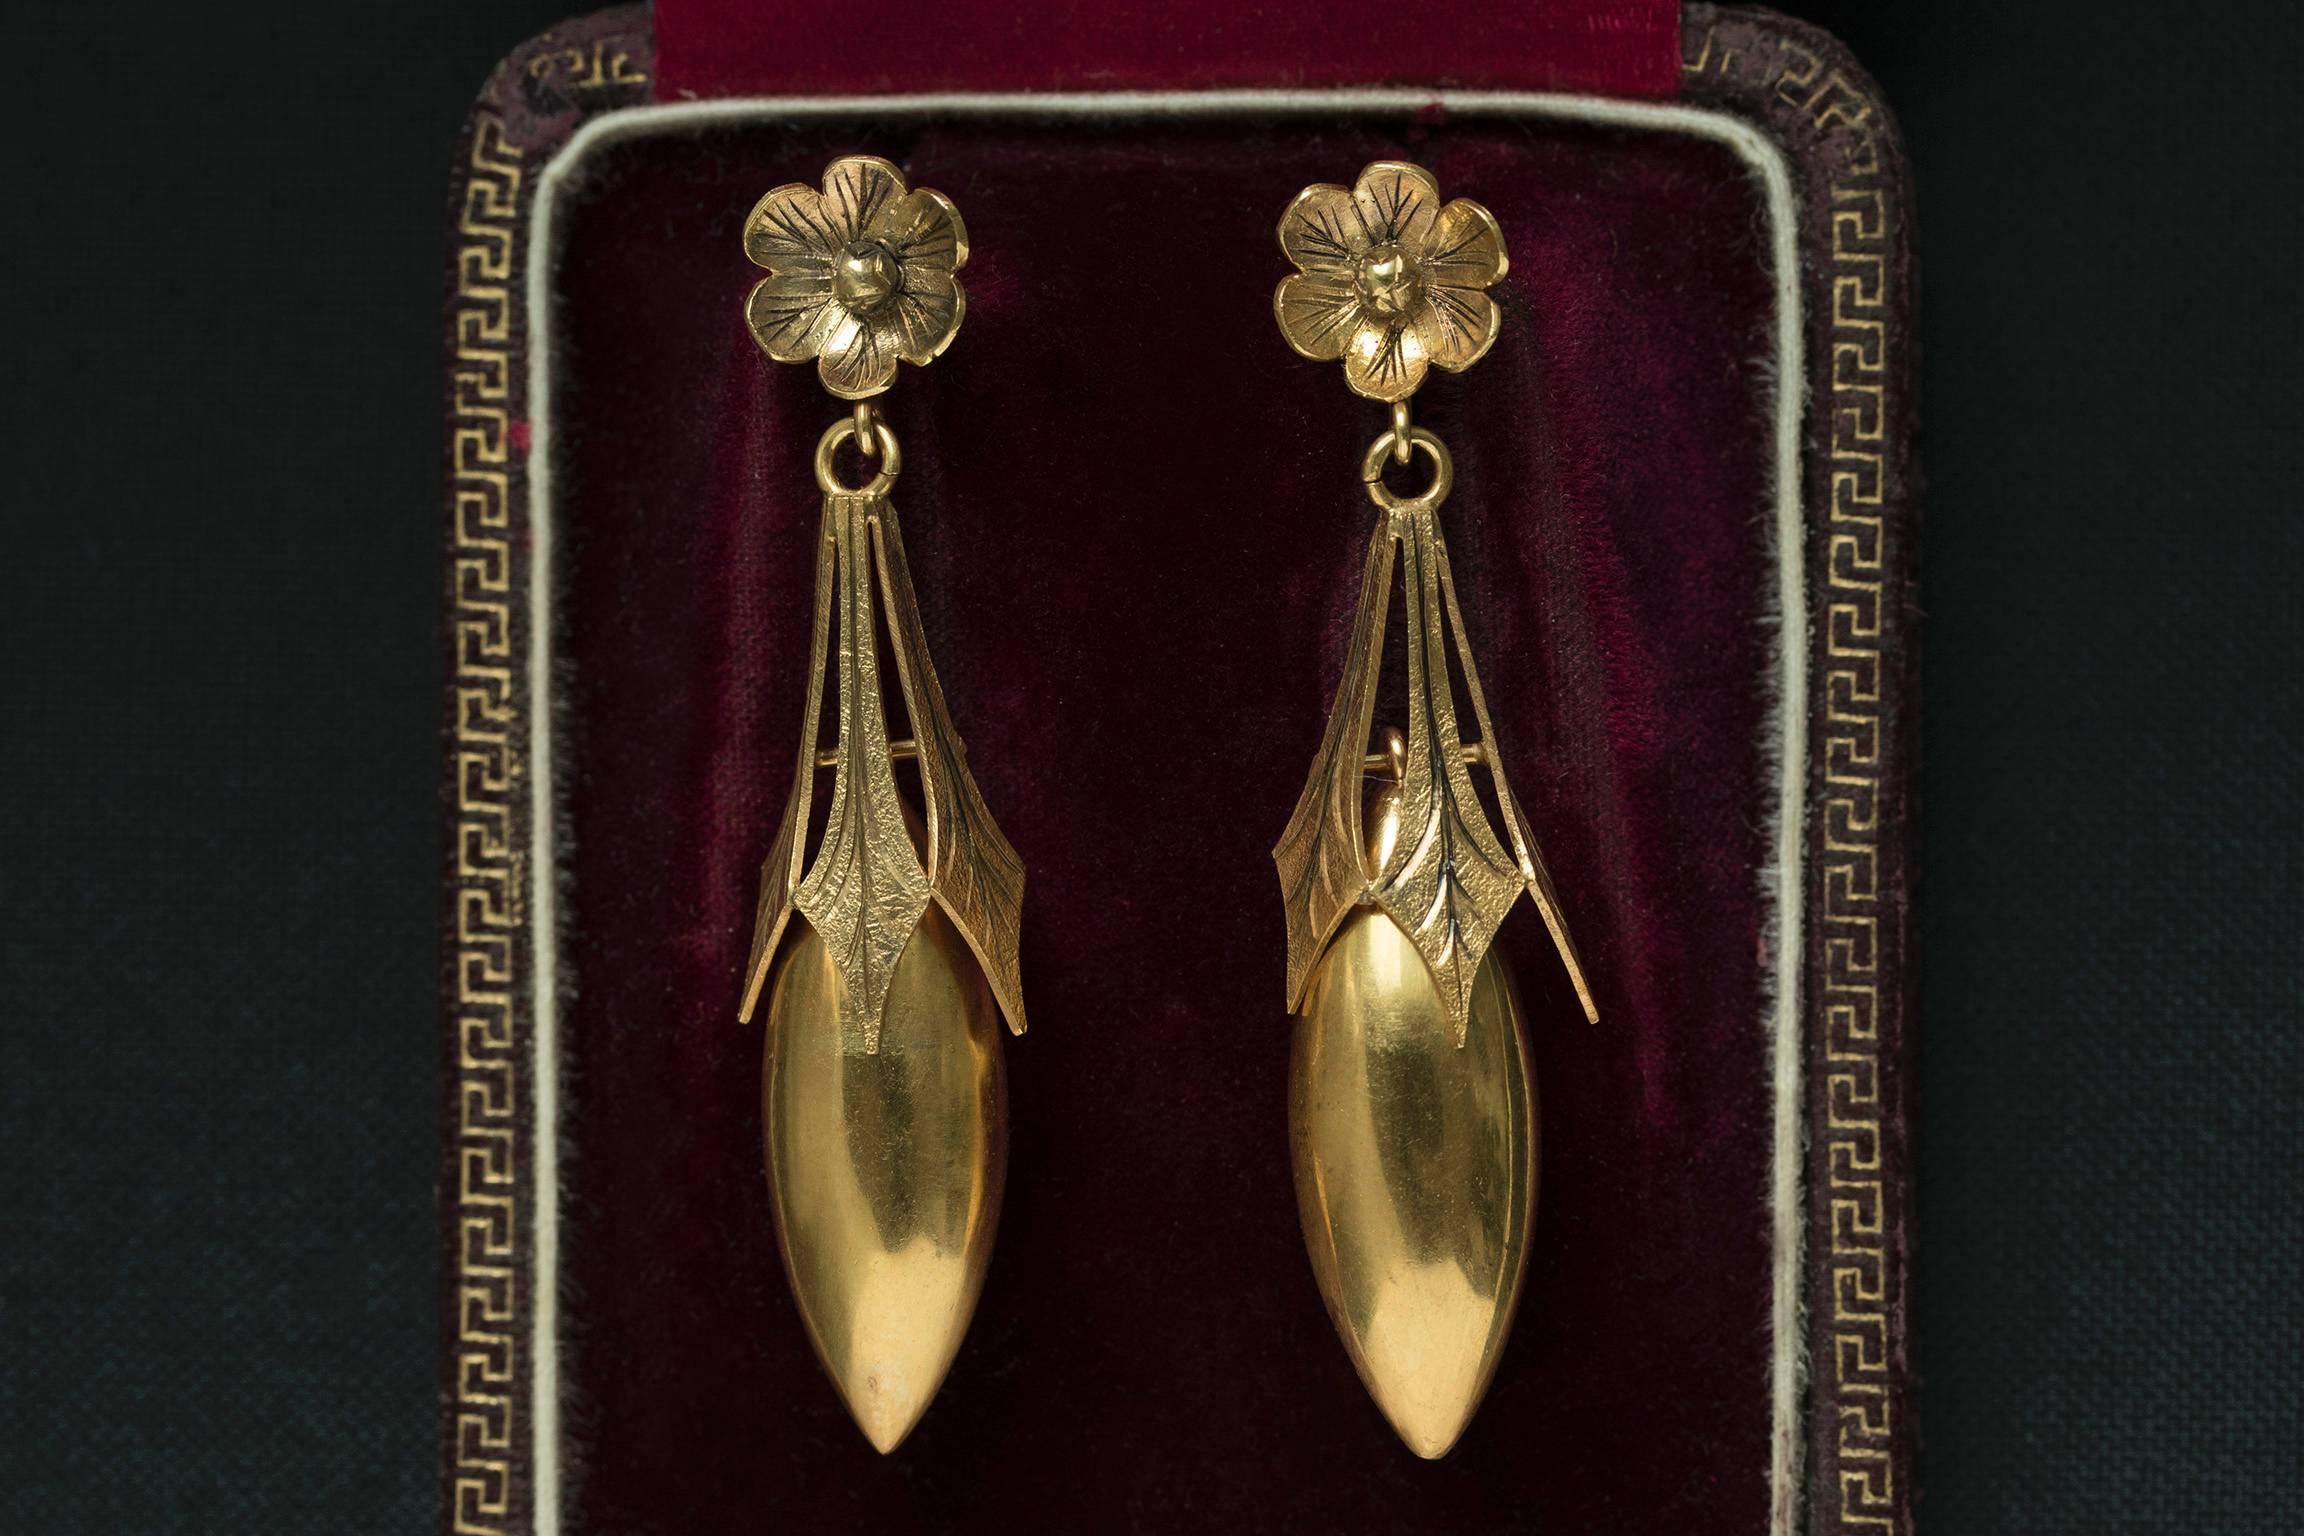 C.1860. A gorgeous pair of Victorian torpedo drop earrings with the flower top. The earrings are 15k yellow gold and English in origin. The back posts are an old replacement. The earrings swing and give beautiful movement when worn.

Total Drop: